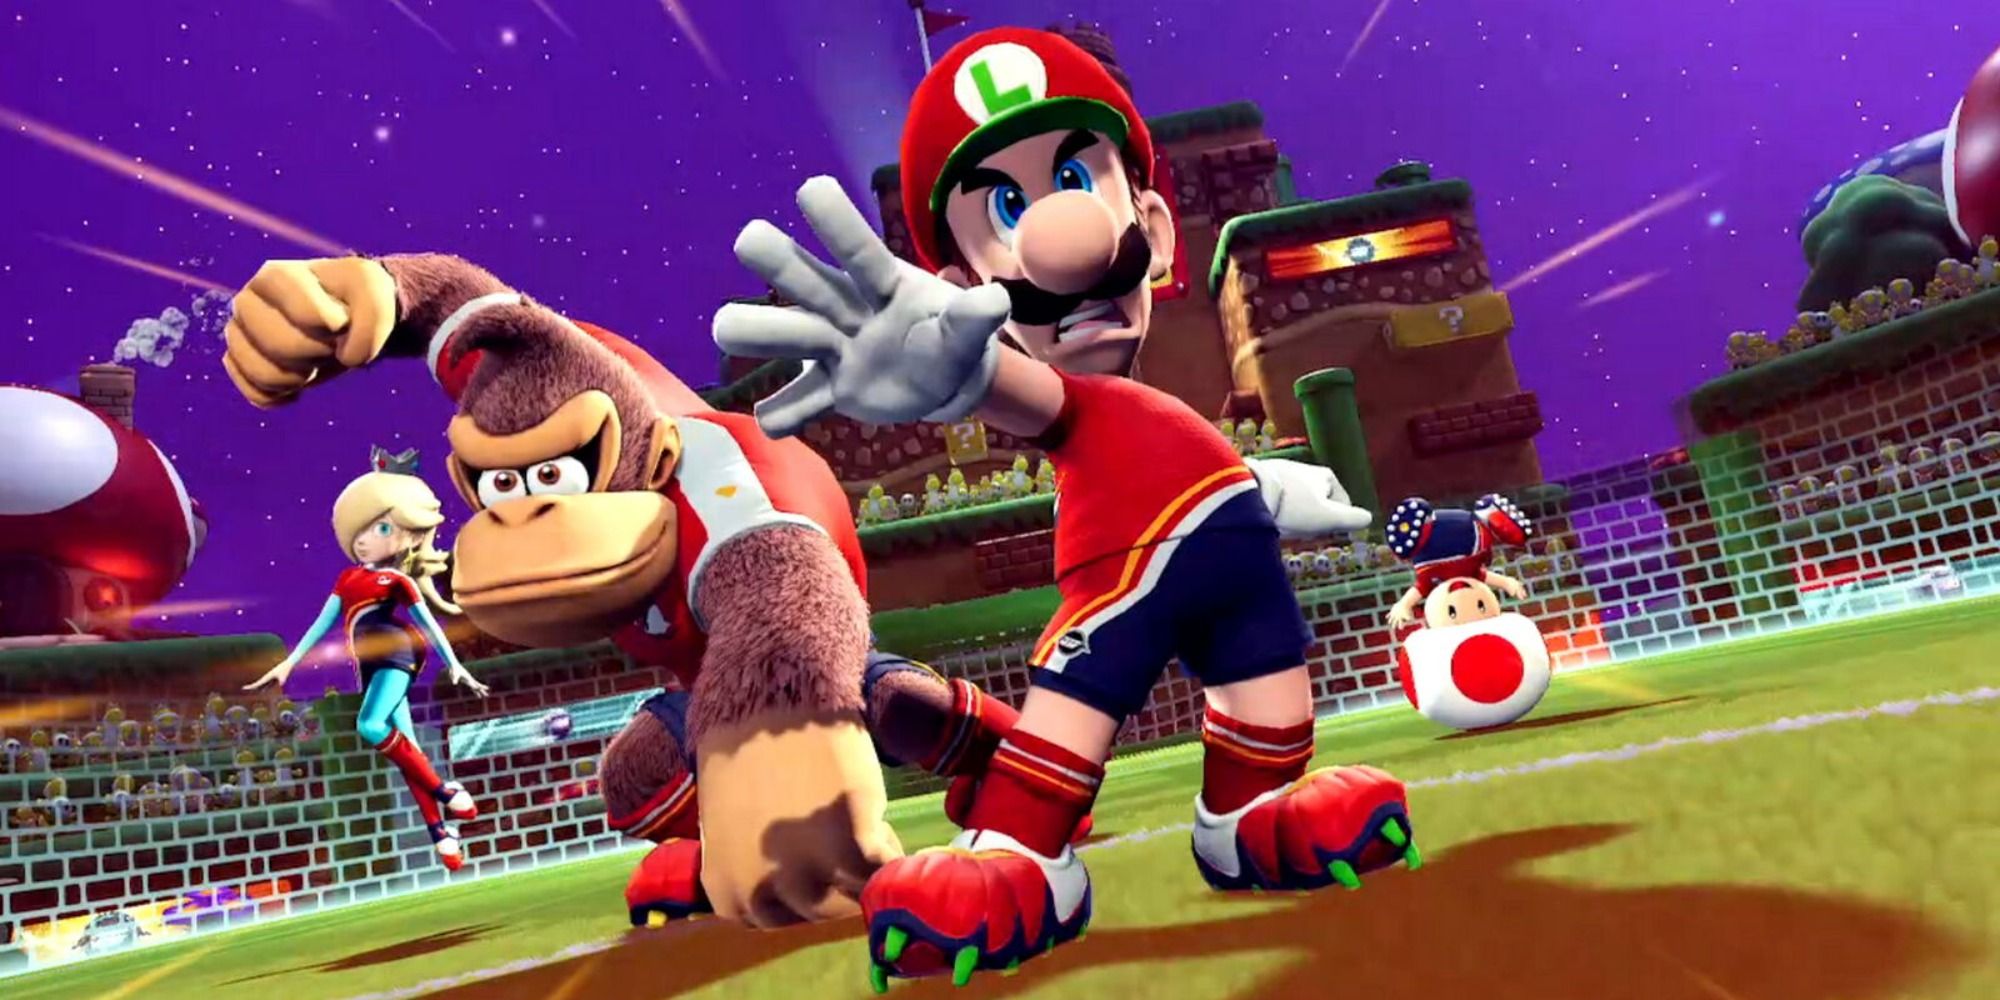 [From left to right] Rosalina, Donkey Kong, Luigi, and Toad as a team in Mario Strikers: Battle League Football